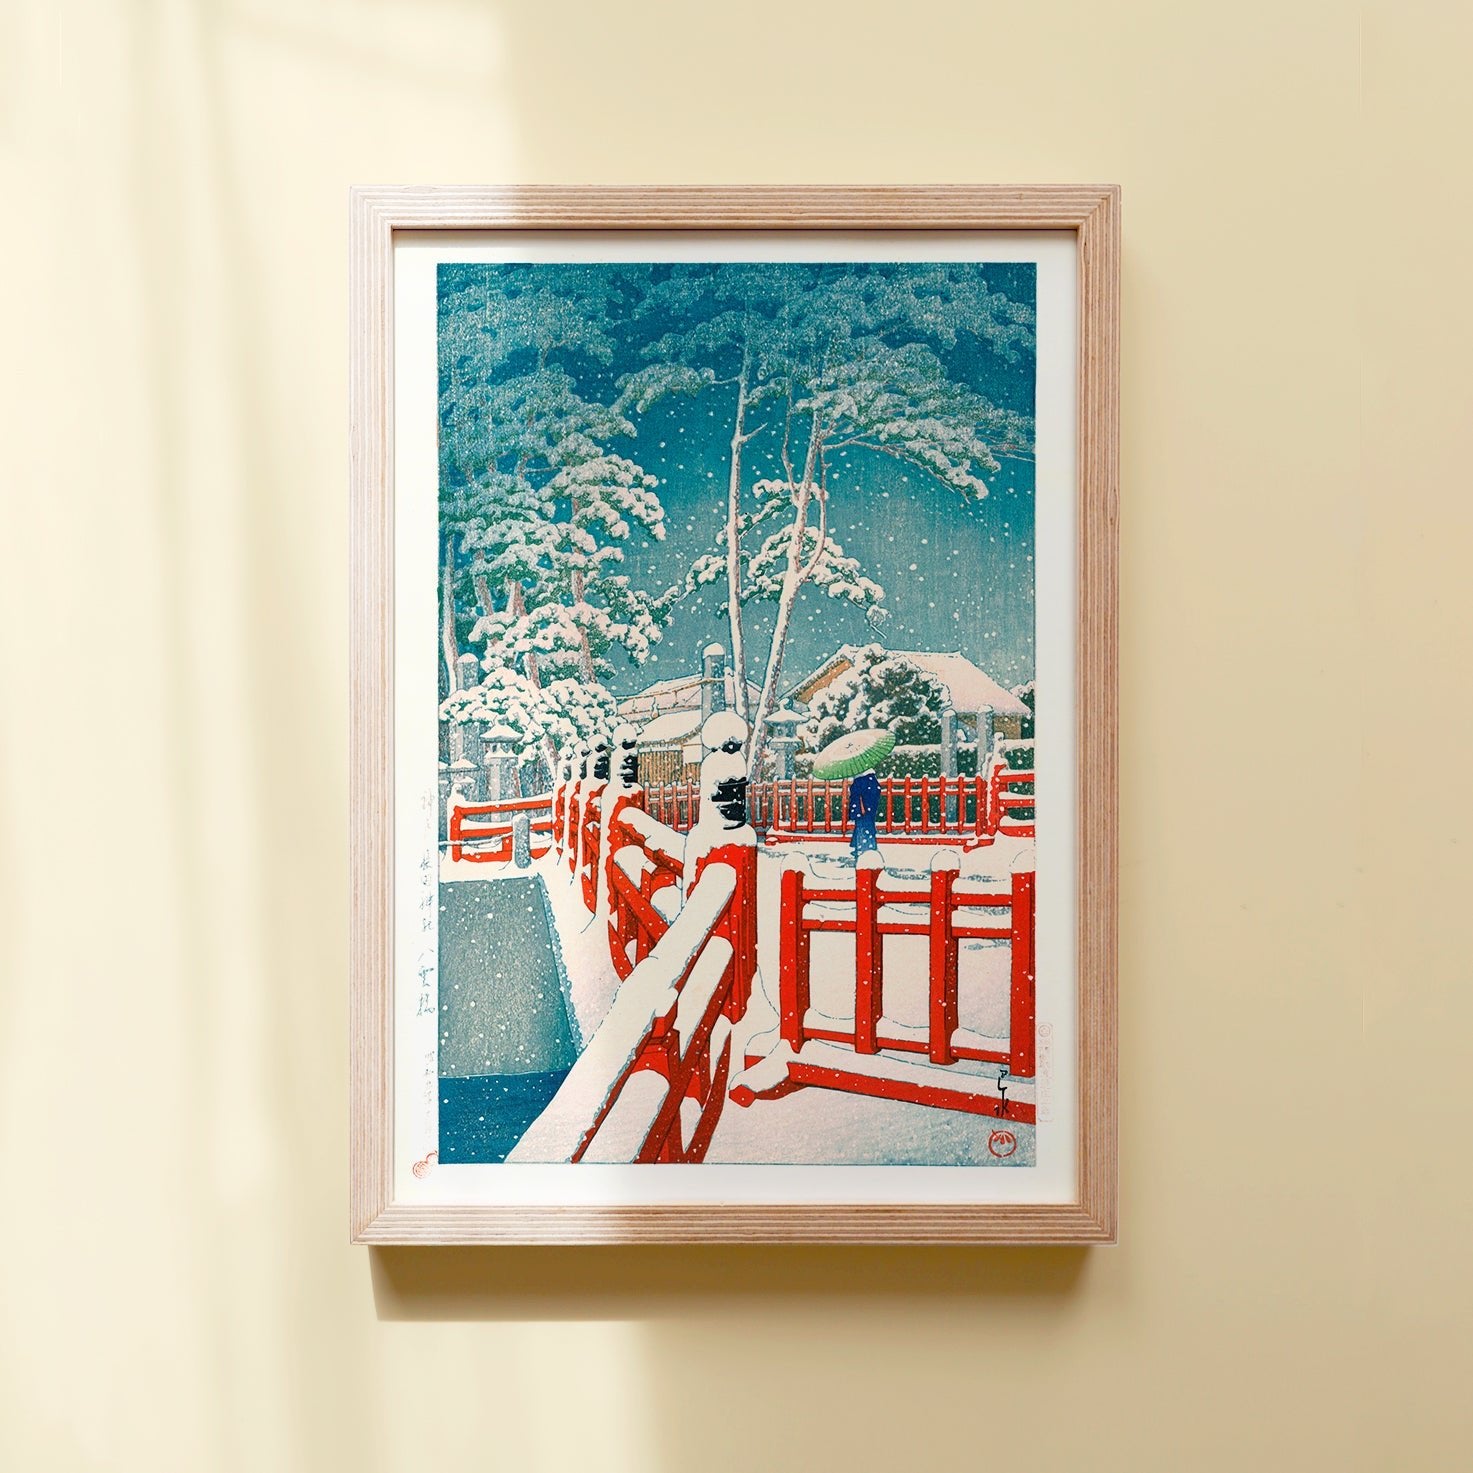 Framed Japanese Art Poster by Kawase Hasui featuring a woman with an umbrella crossing a red bridge in the snow